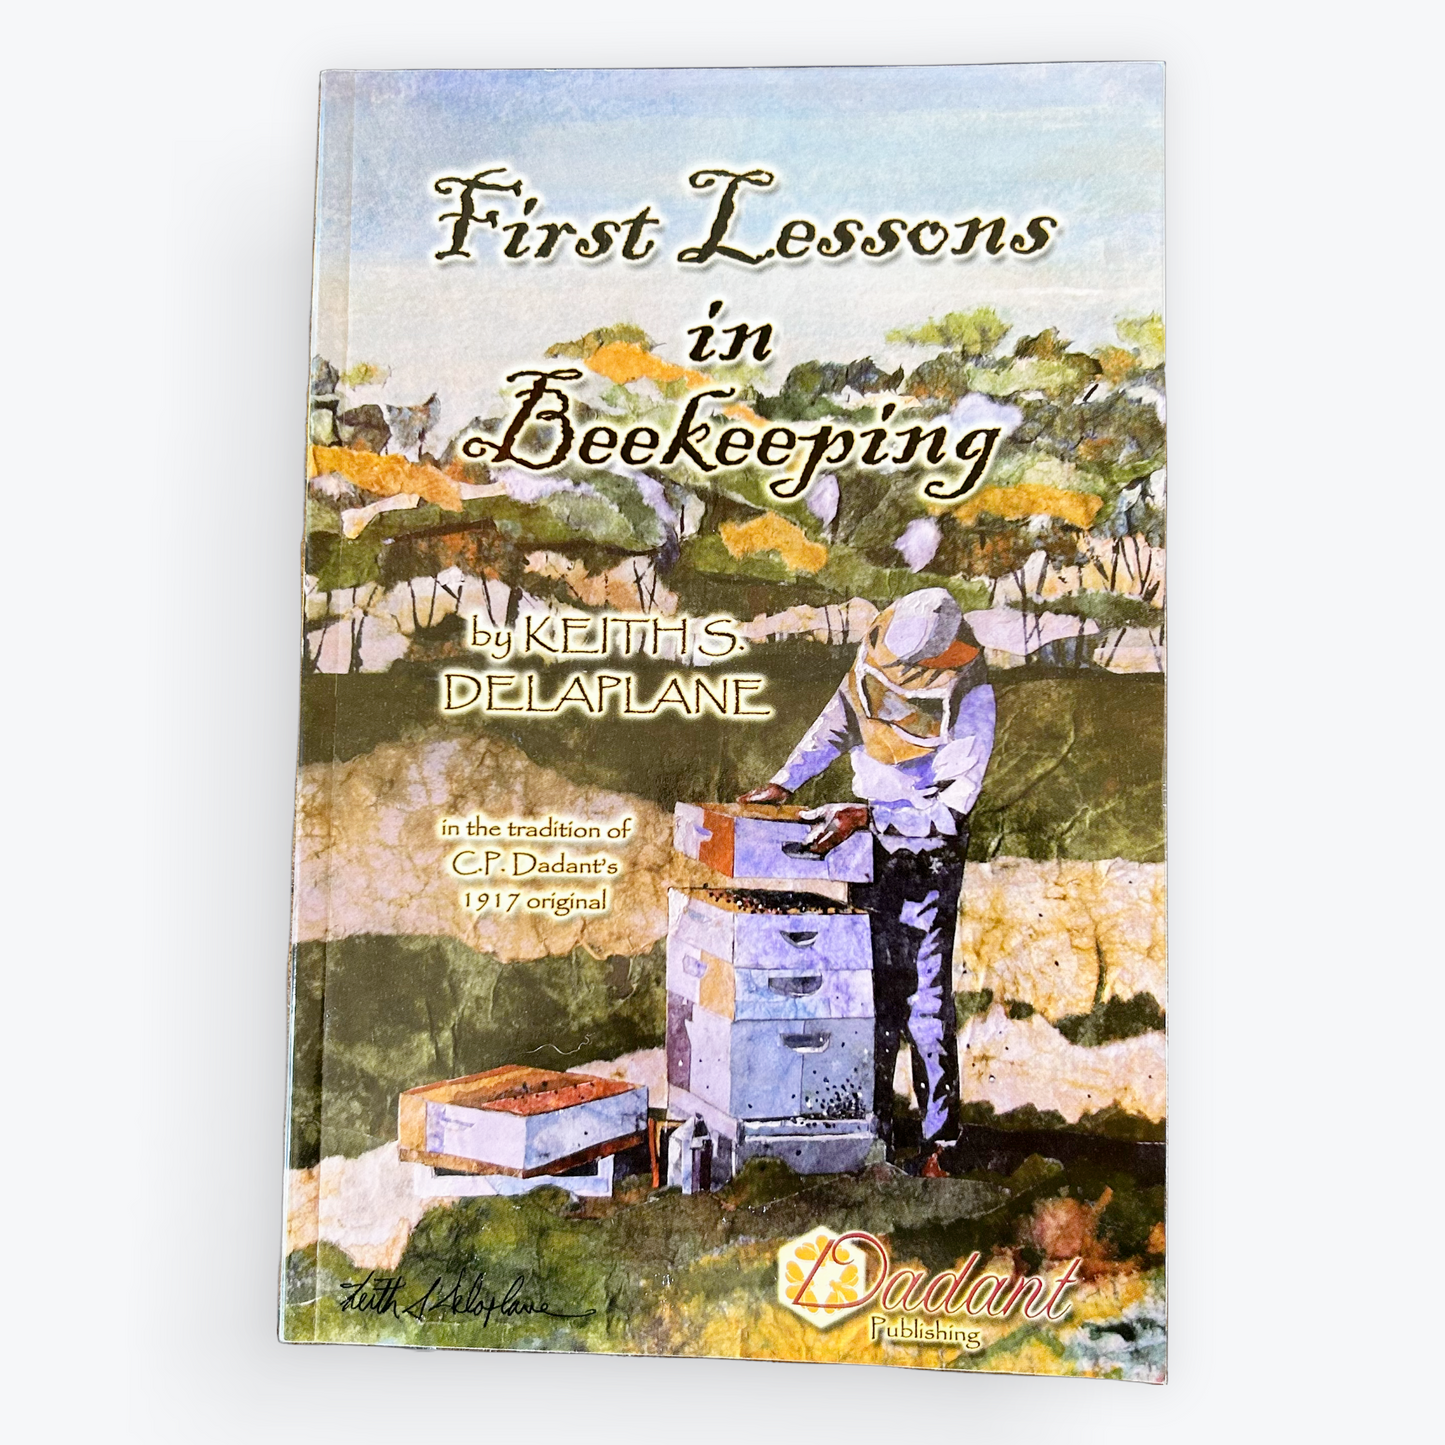 First Lessons in Beekeeping book by Keith S. Delaplane